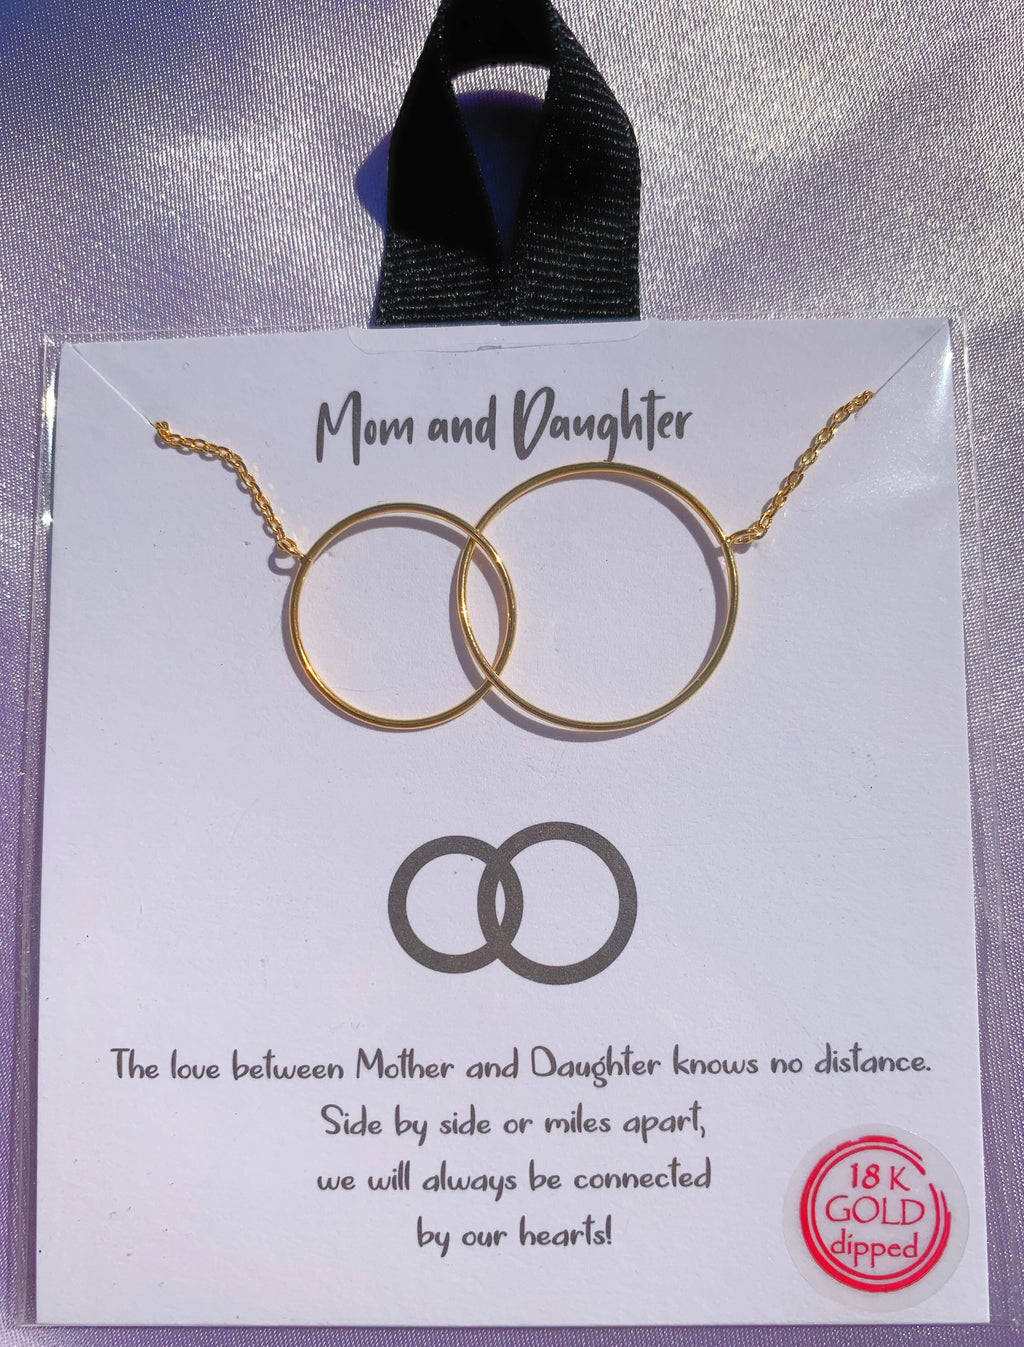 Mom and daughter necklace